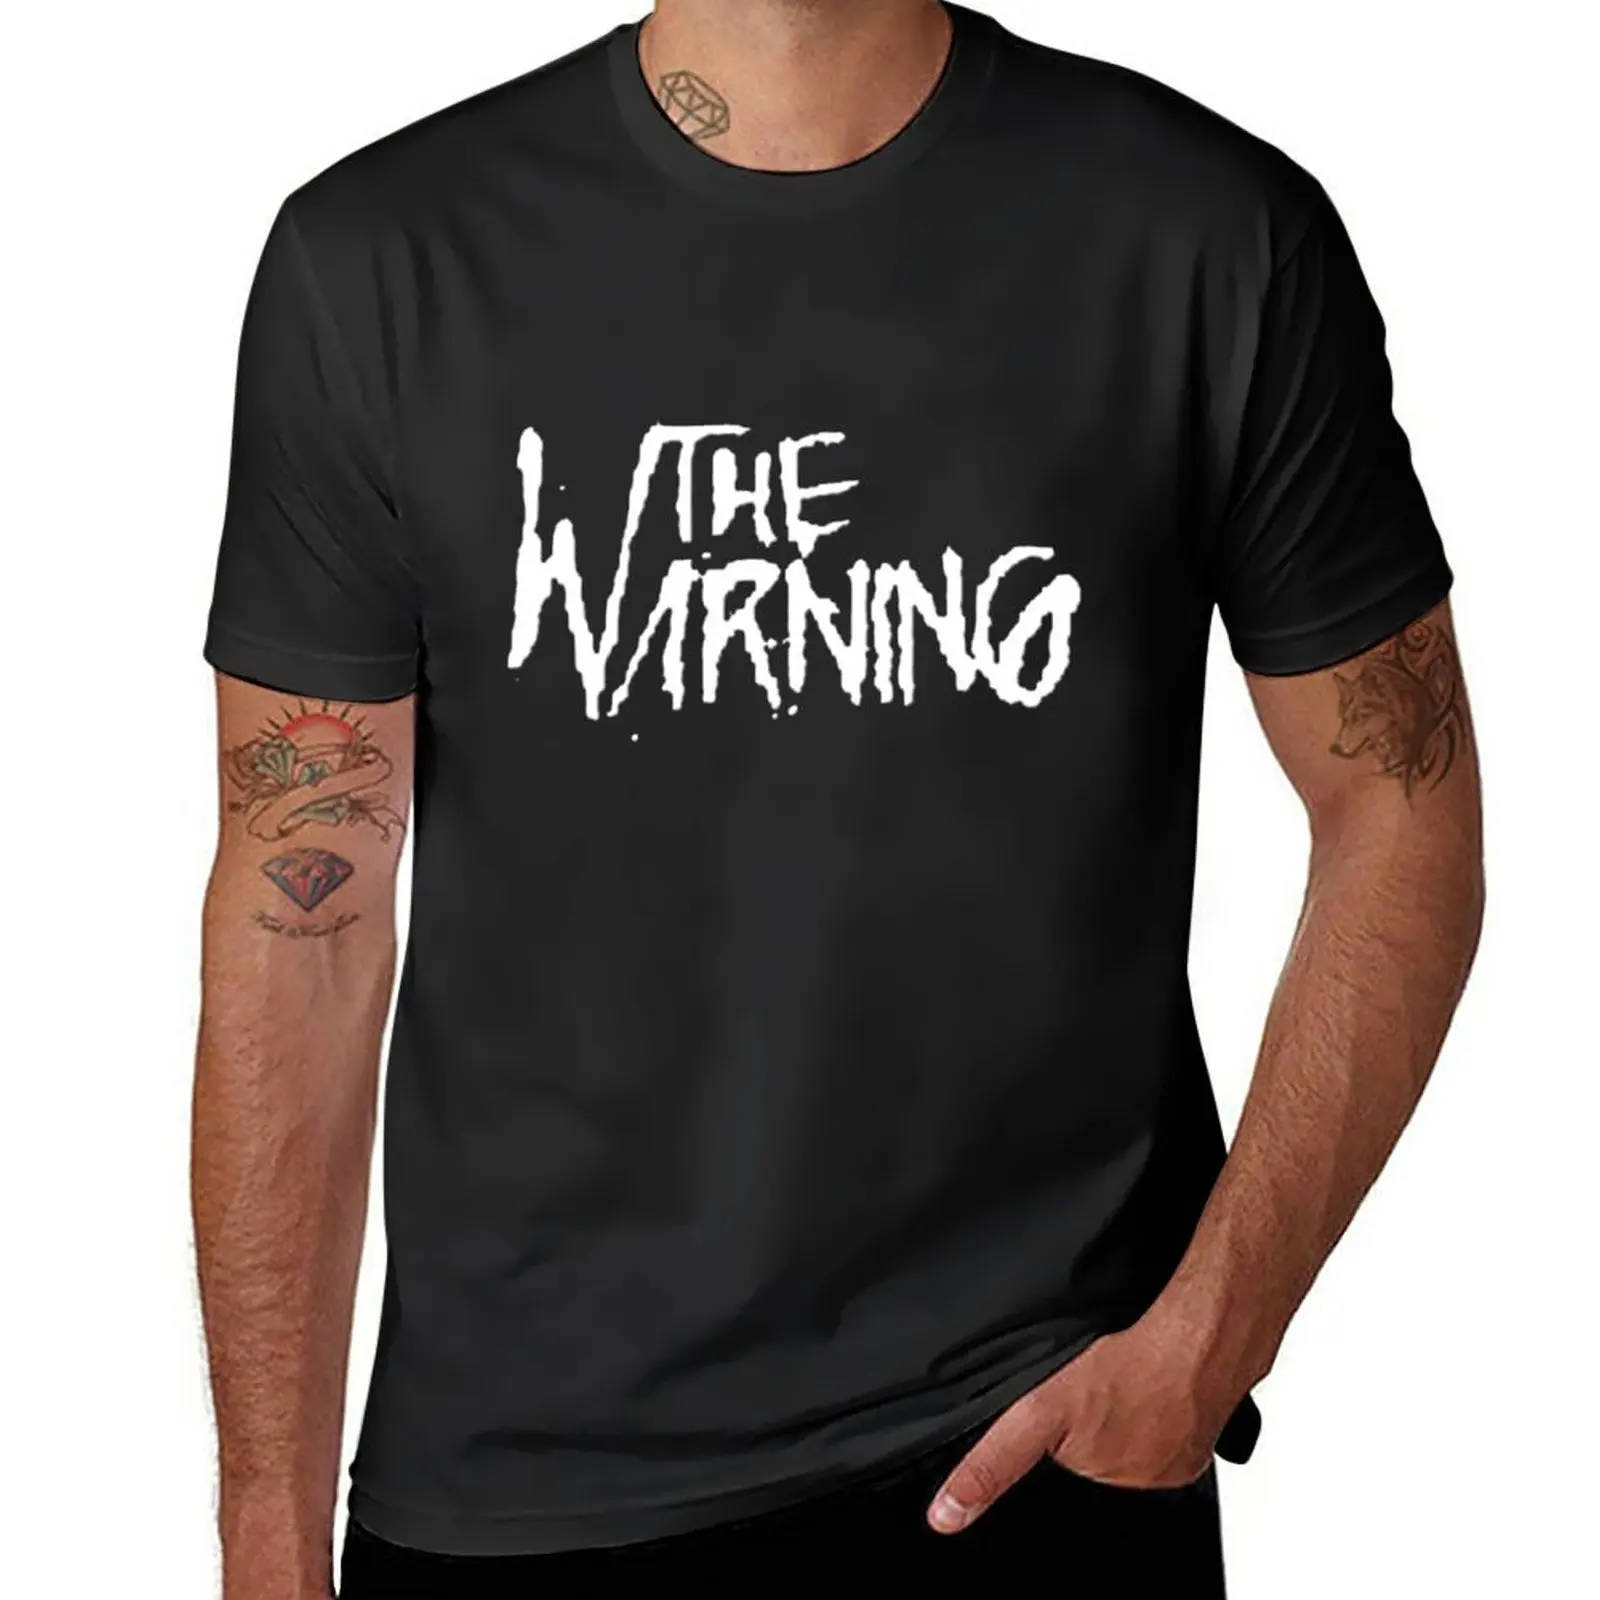 

New Best Of The Warning is a Mexican Rock T-Shirt plus size t shirts quick drying shirt plain white t shirts men